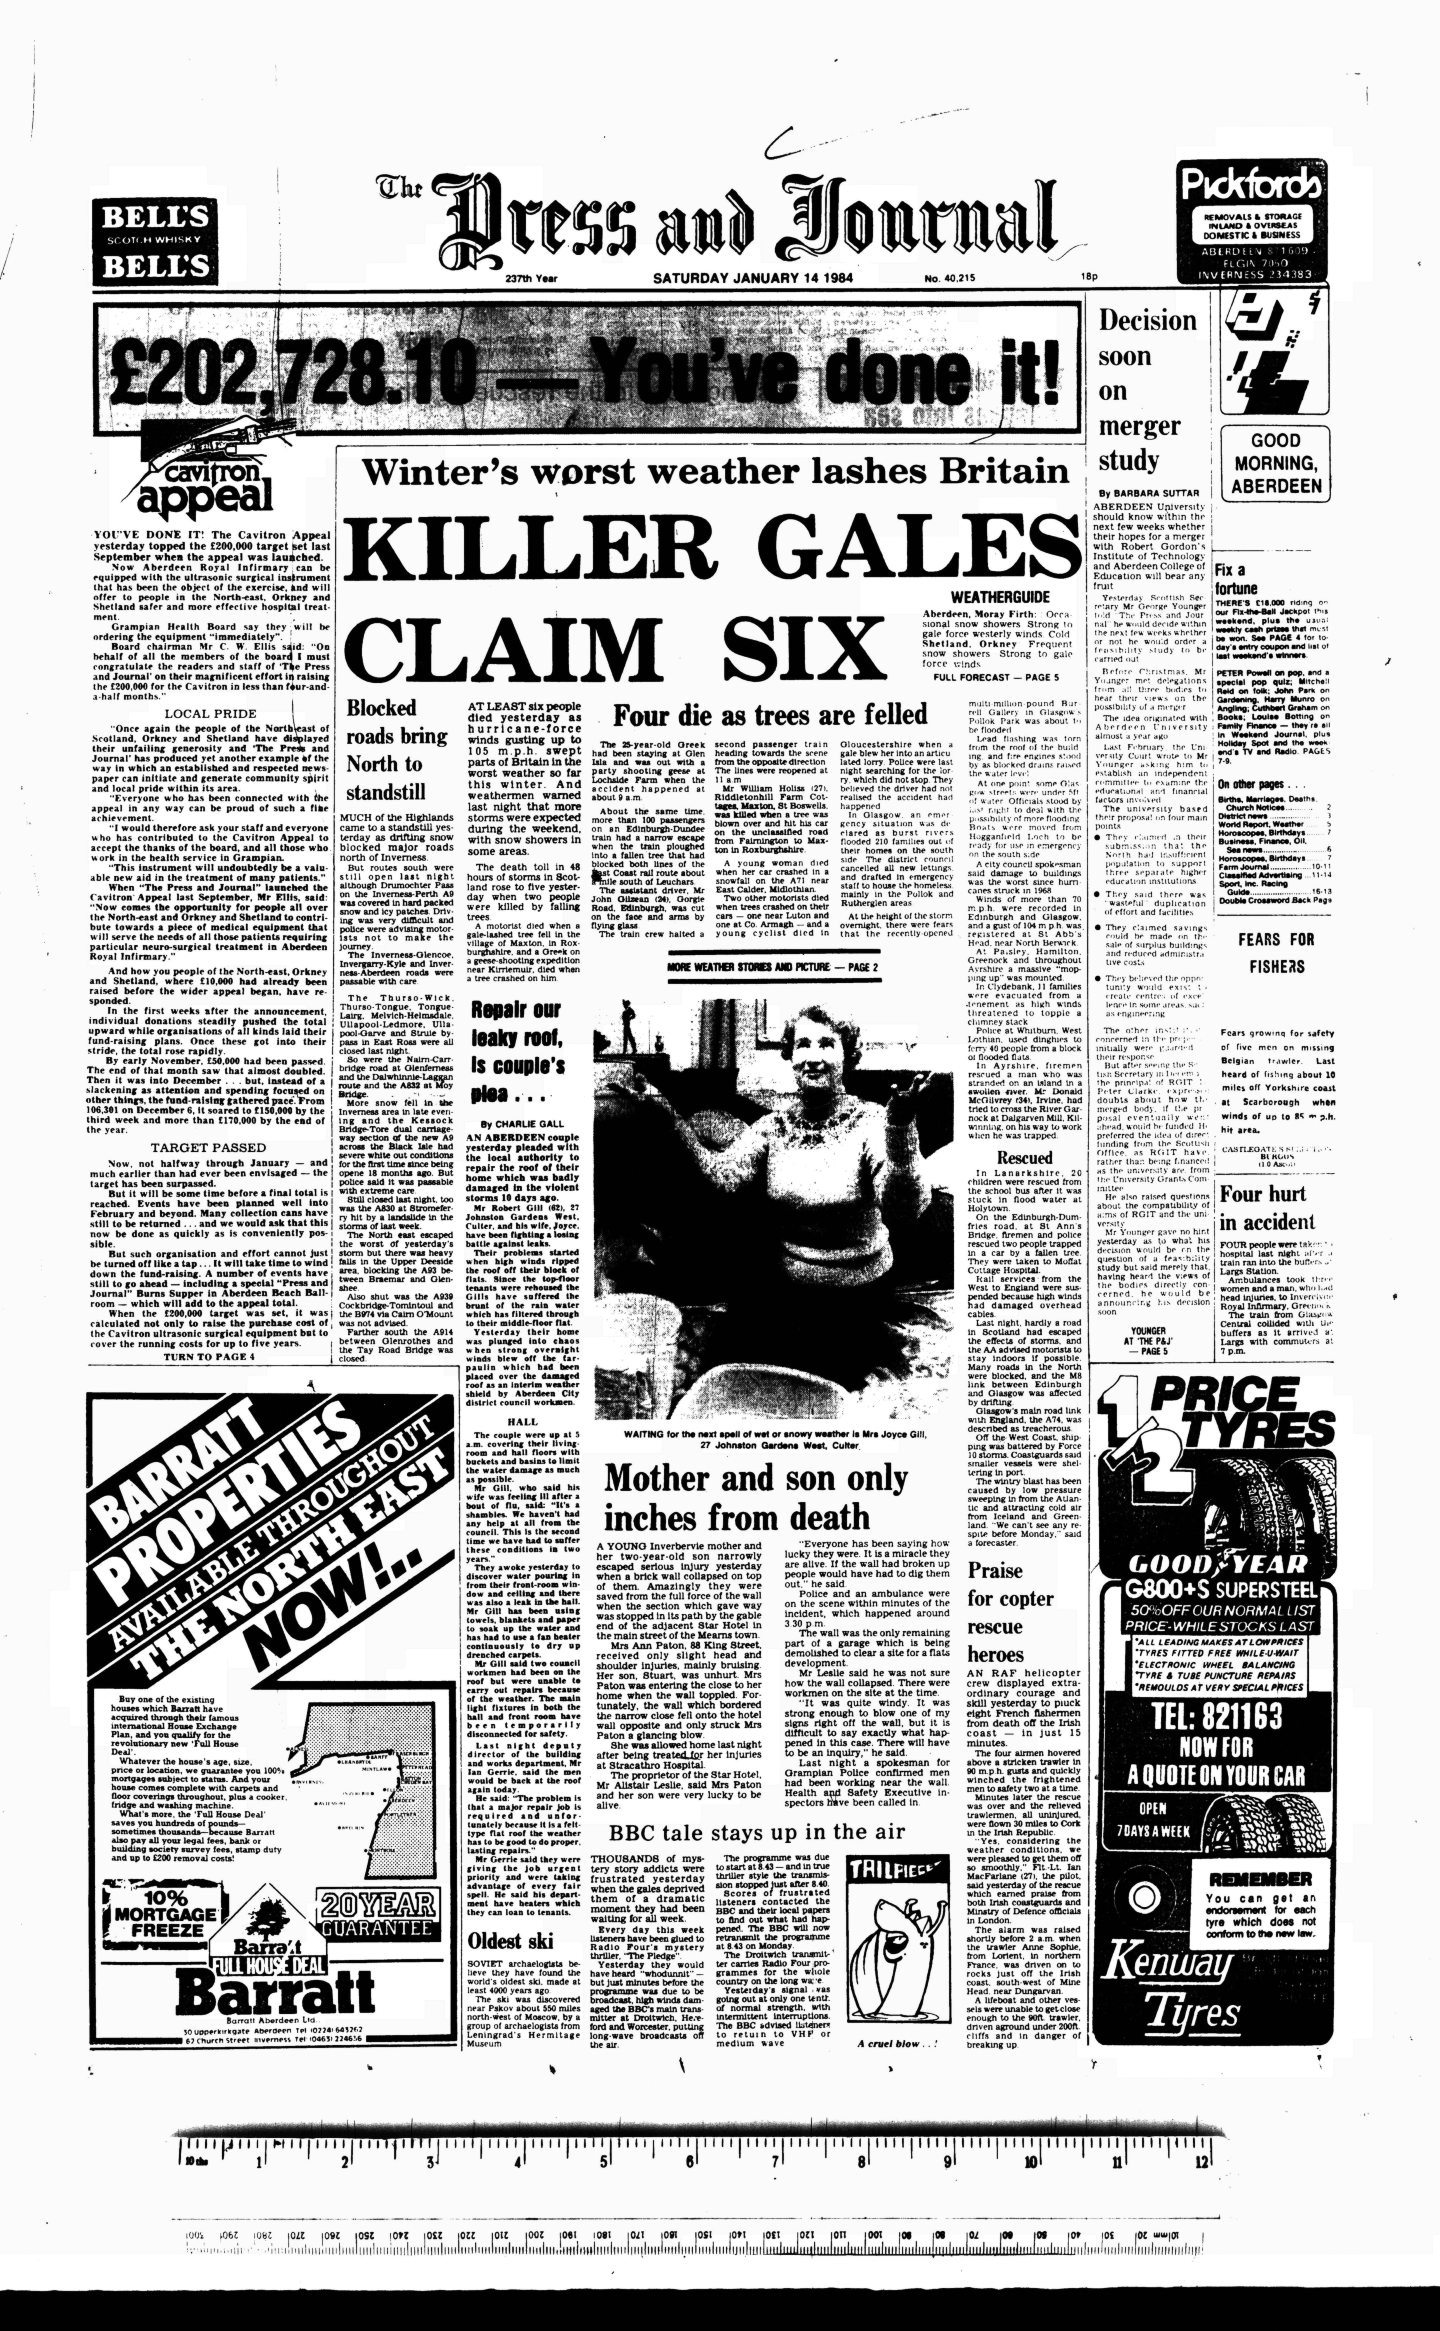 Newspaper frontpage detailing that the Cavitron appeal had reached its goal